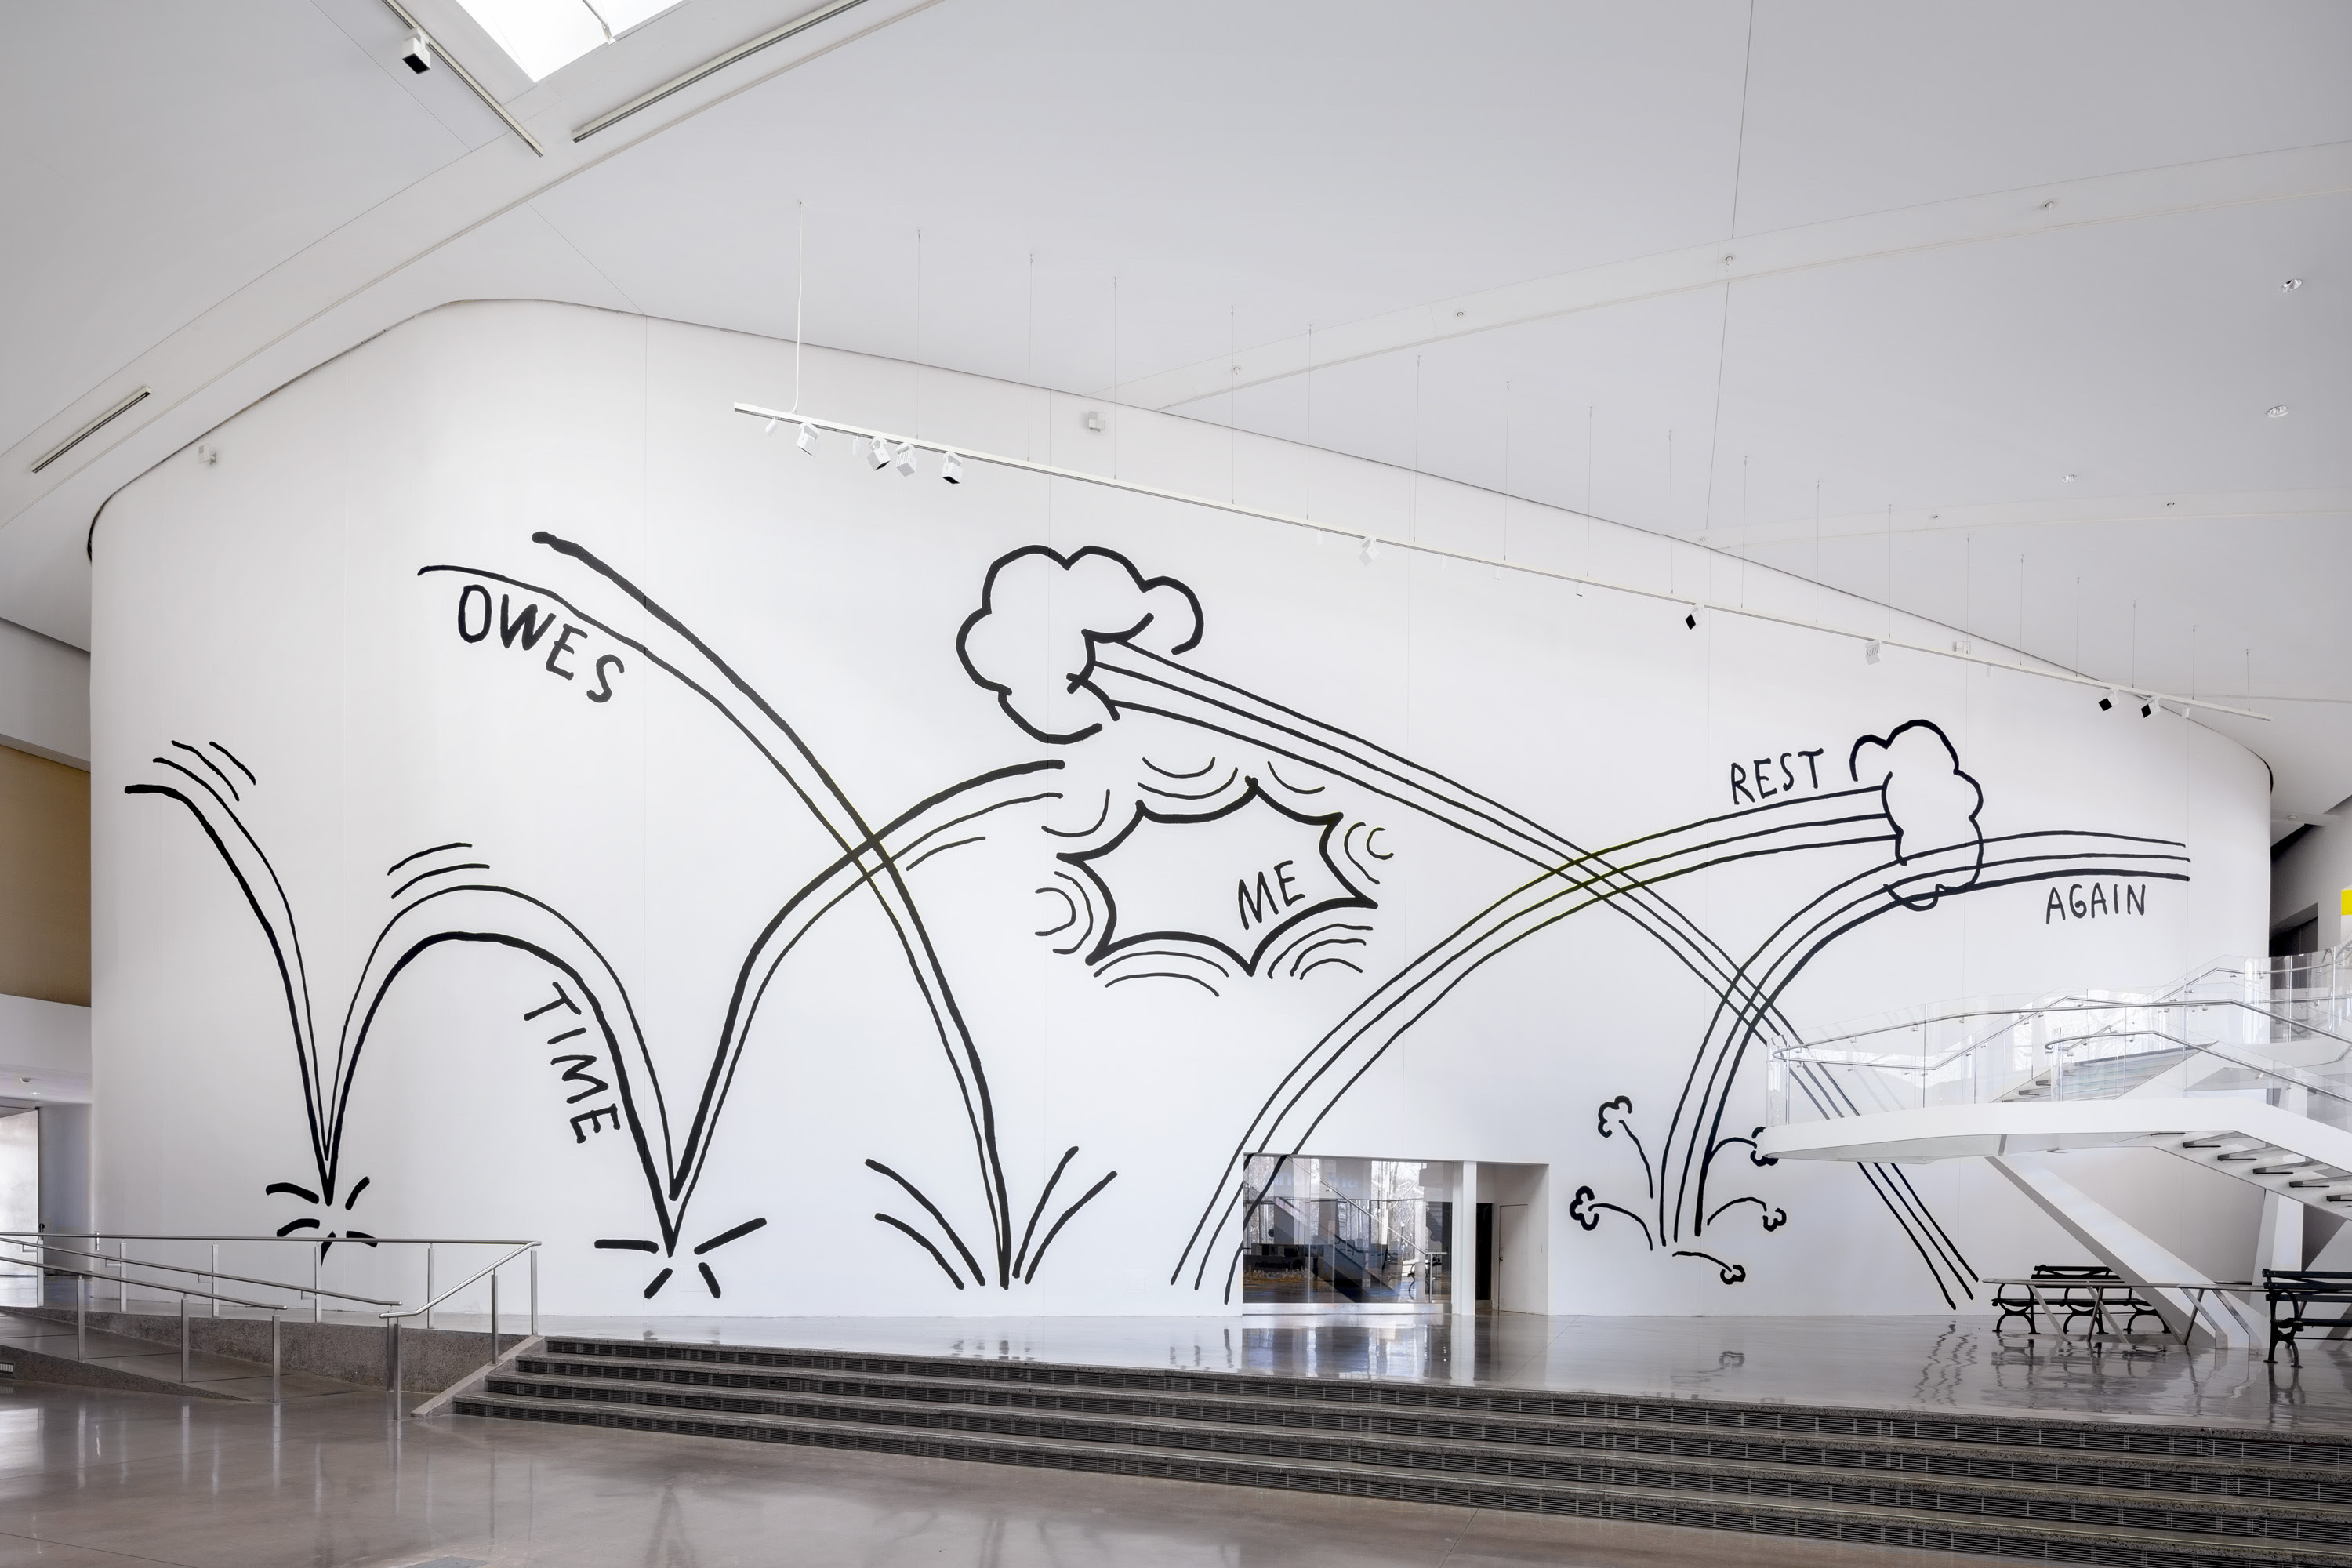 An installation shot of Christine Sun Kim's new mural "Time Owes Me Rest Again". Photo: Hai Zhang. The photo shows a monumental wall at the center of the Queens Museum with painted illustrations inspired by comic book graphics that are commonly used to represent movement and contact. Five words appear "Time", "Owes", "Me", "Rest", "Again". 